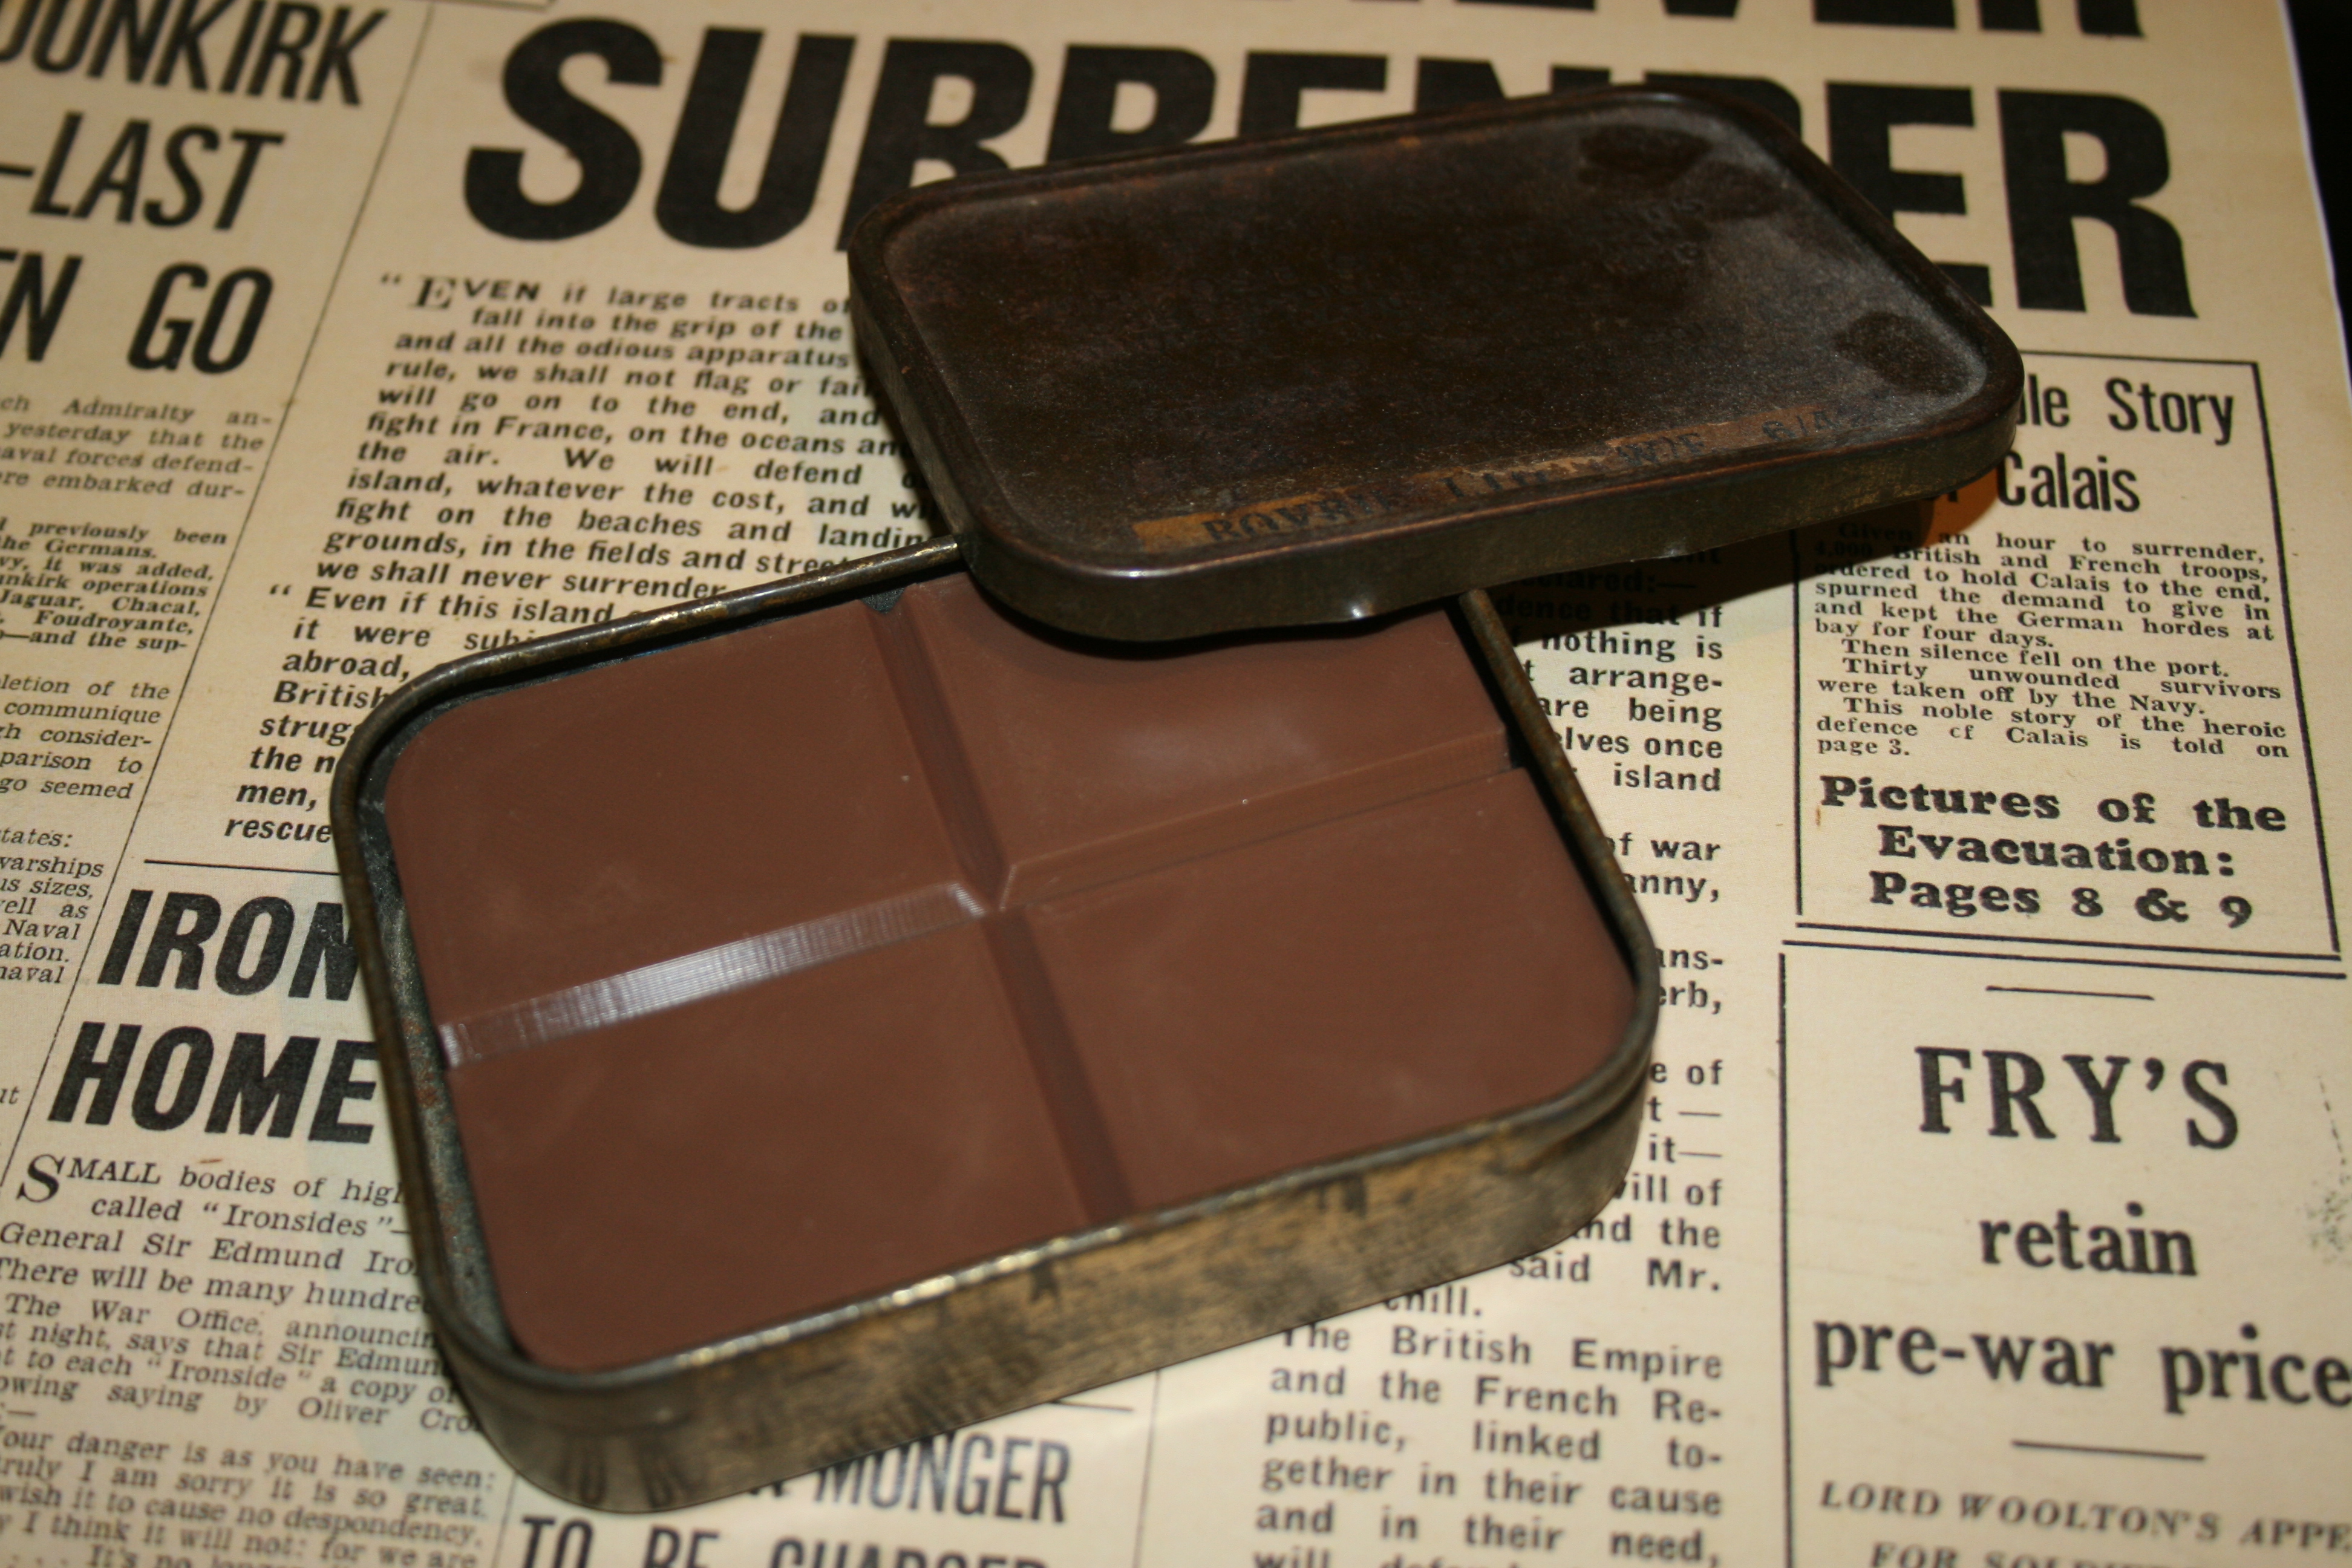 24HR Emergency ration tin contents - school and display safe